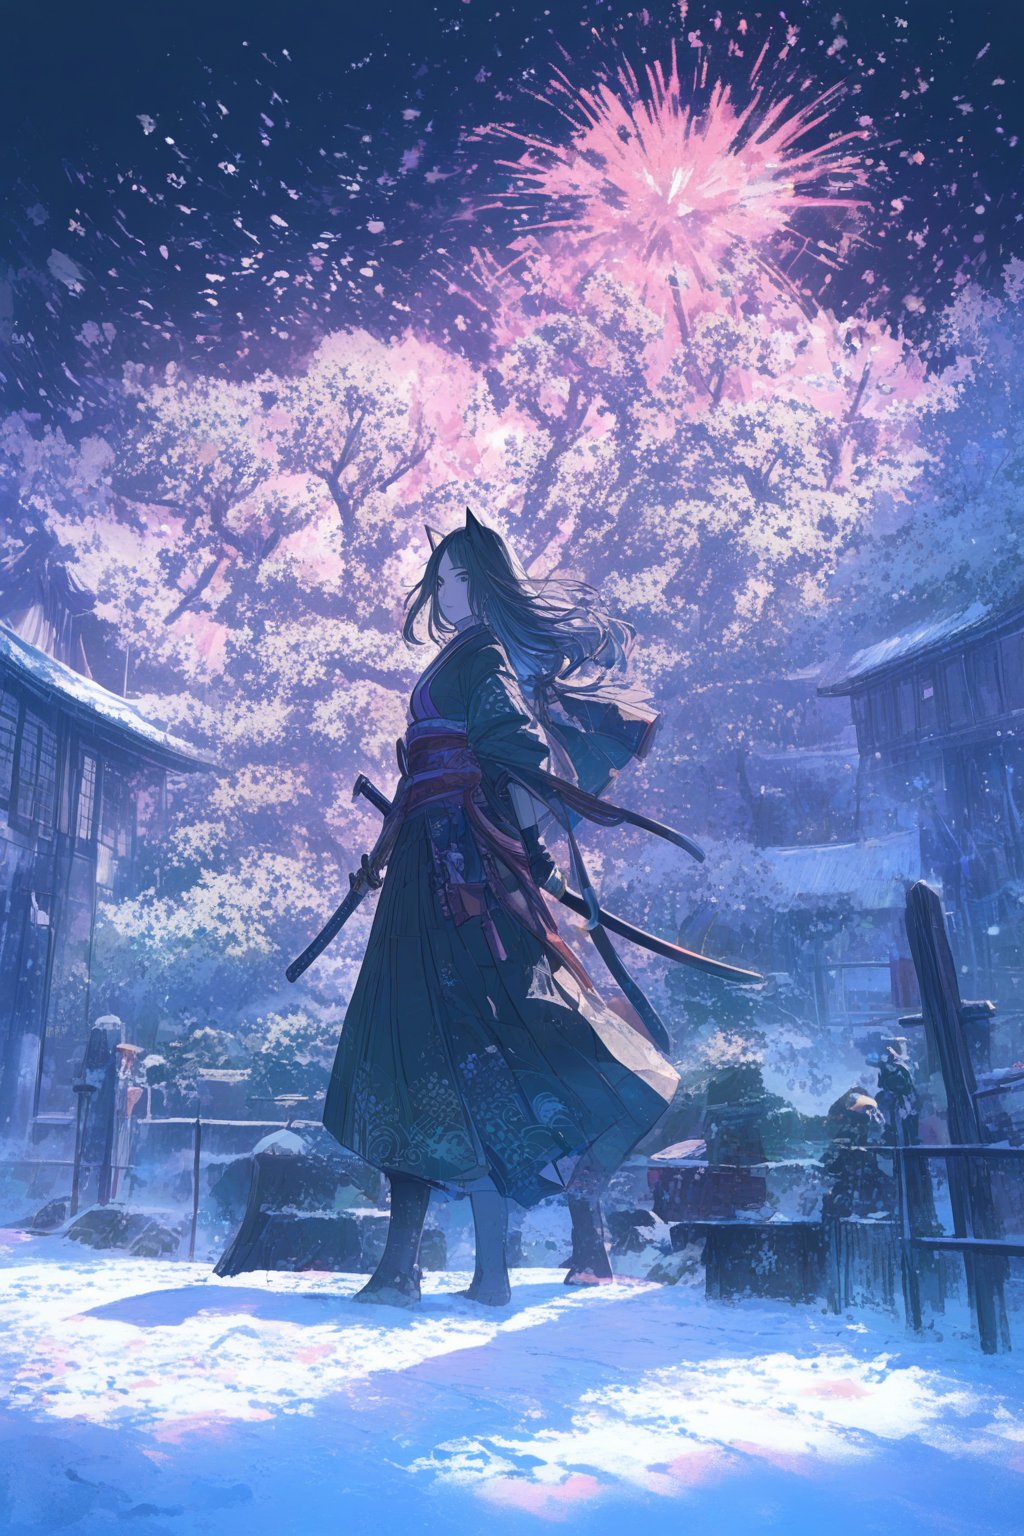 Official Art, Unity 8K Wallpaper, Extreme Detailed, Beautiful and Aesthetic, Masterpiece, Top Quality, perfect anatomy, a beautifully drawn (((ink illustration))) depicting, integrating elements of calligraphy, vintage, green and pink accents, watercolor painting, concept art, (best illustration), (best shadow), Analog Color Theme, vivid colours, contrast, smooth, sharp focus, scenery,

masterpiece, best quality, domestic_long-haired_cat, flat color, oil painting style, winter season, Christmas, snow, with colorful fireworks, flooded
,ink ,oil paint..............,more detail XL,(Pencil_Sketch:1.2, messy lines,Ukiyo-e,ink,colorful,niji6,samurai,shogun,katana,tanto